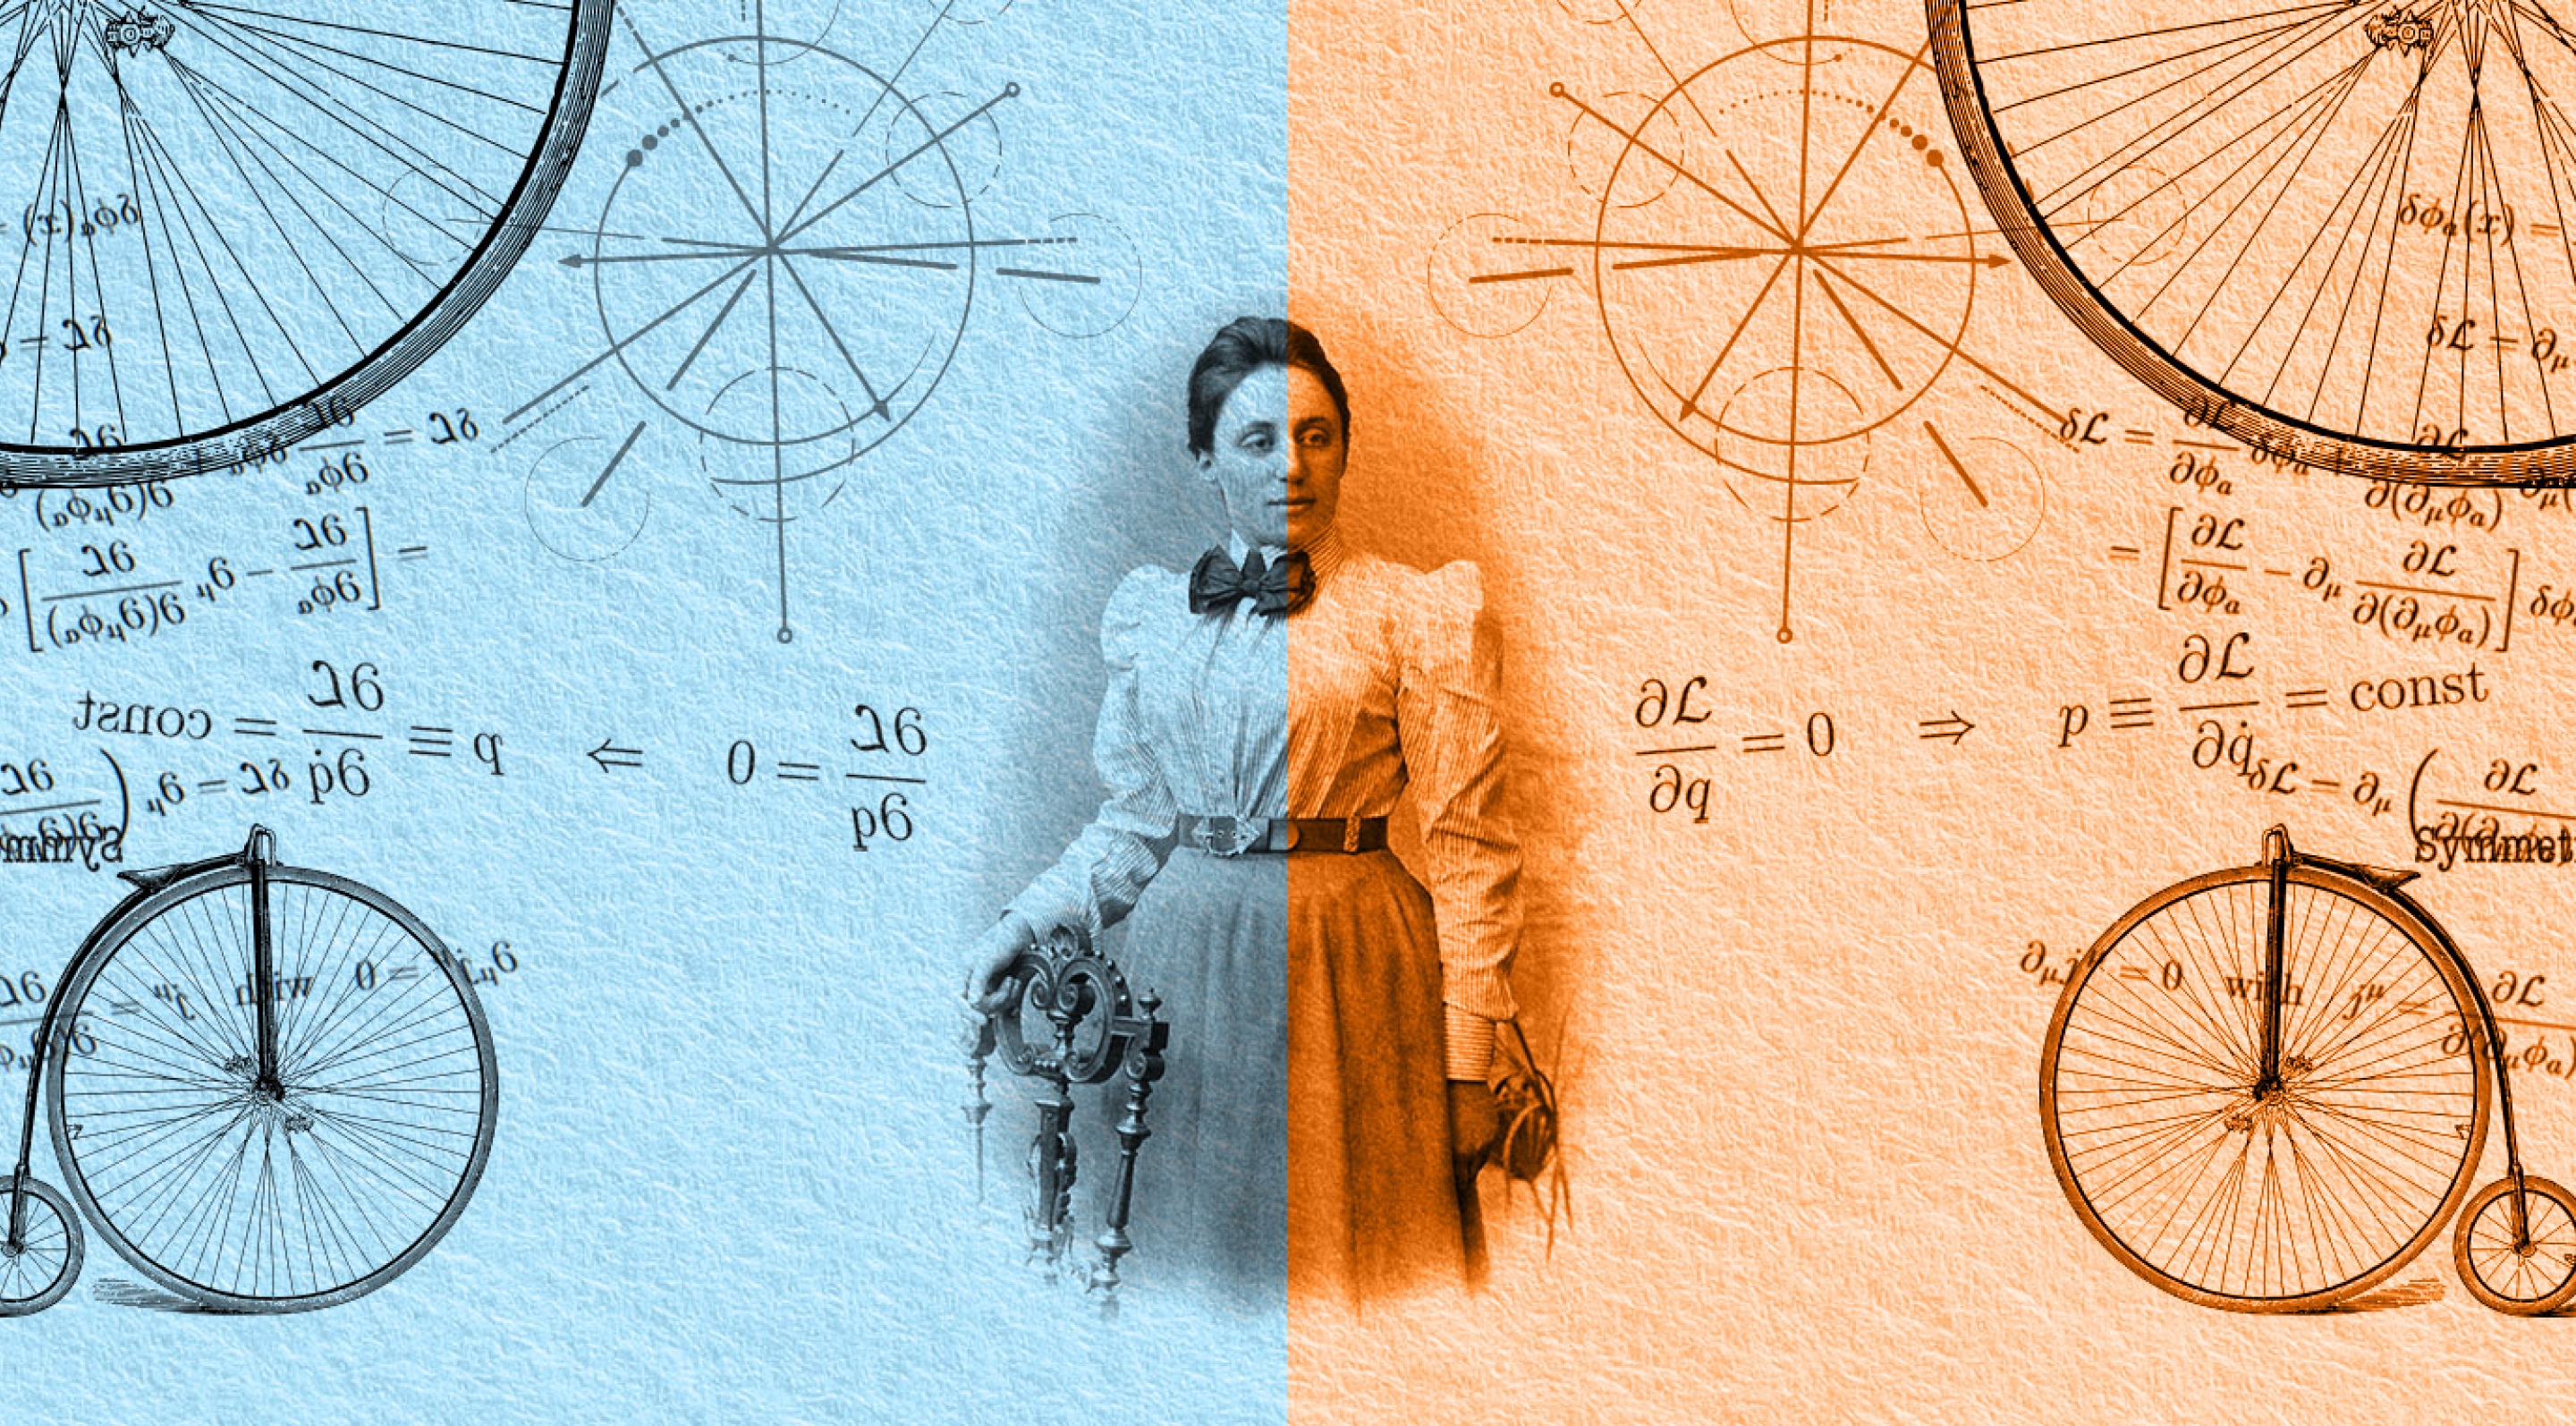 Collage of Emmy Noether and equations with one half blue and the other half orange